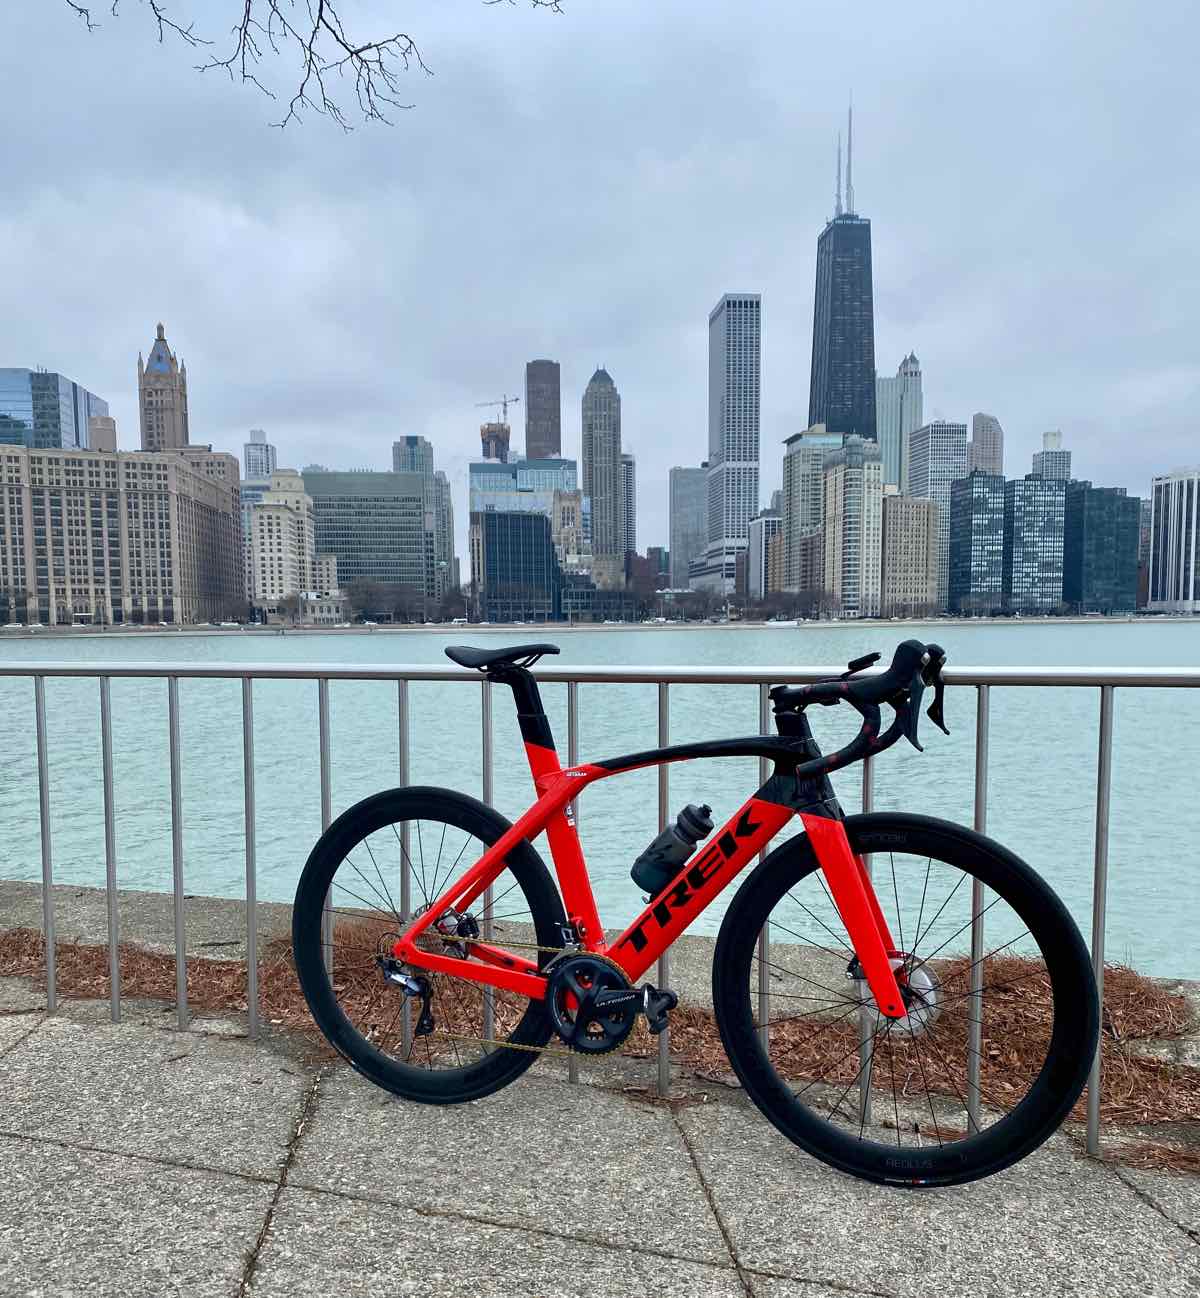 bikerumor pic of the day new trek bike day on the lakefront trail at milton lee olive park overlooking the chicago skyline in illinois